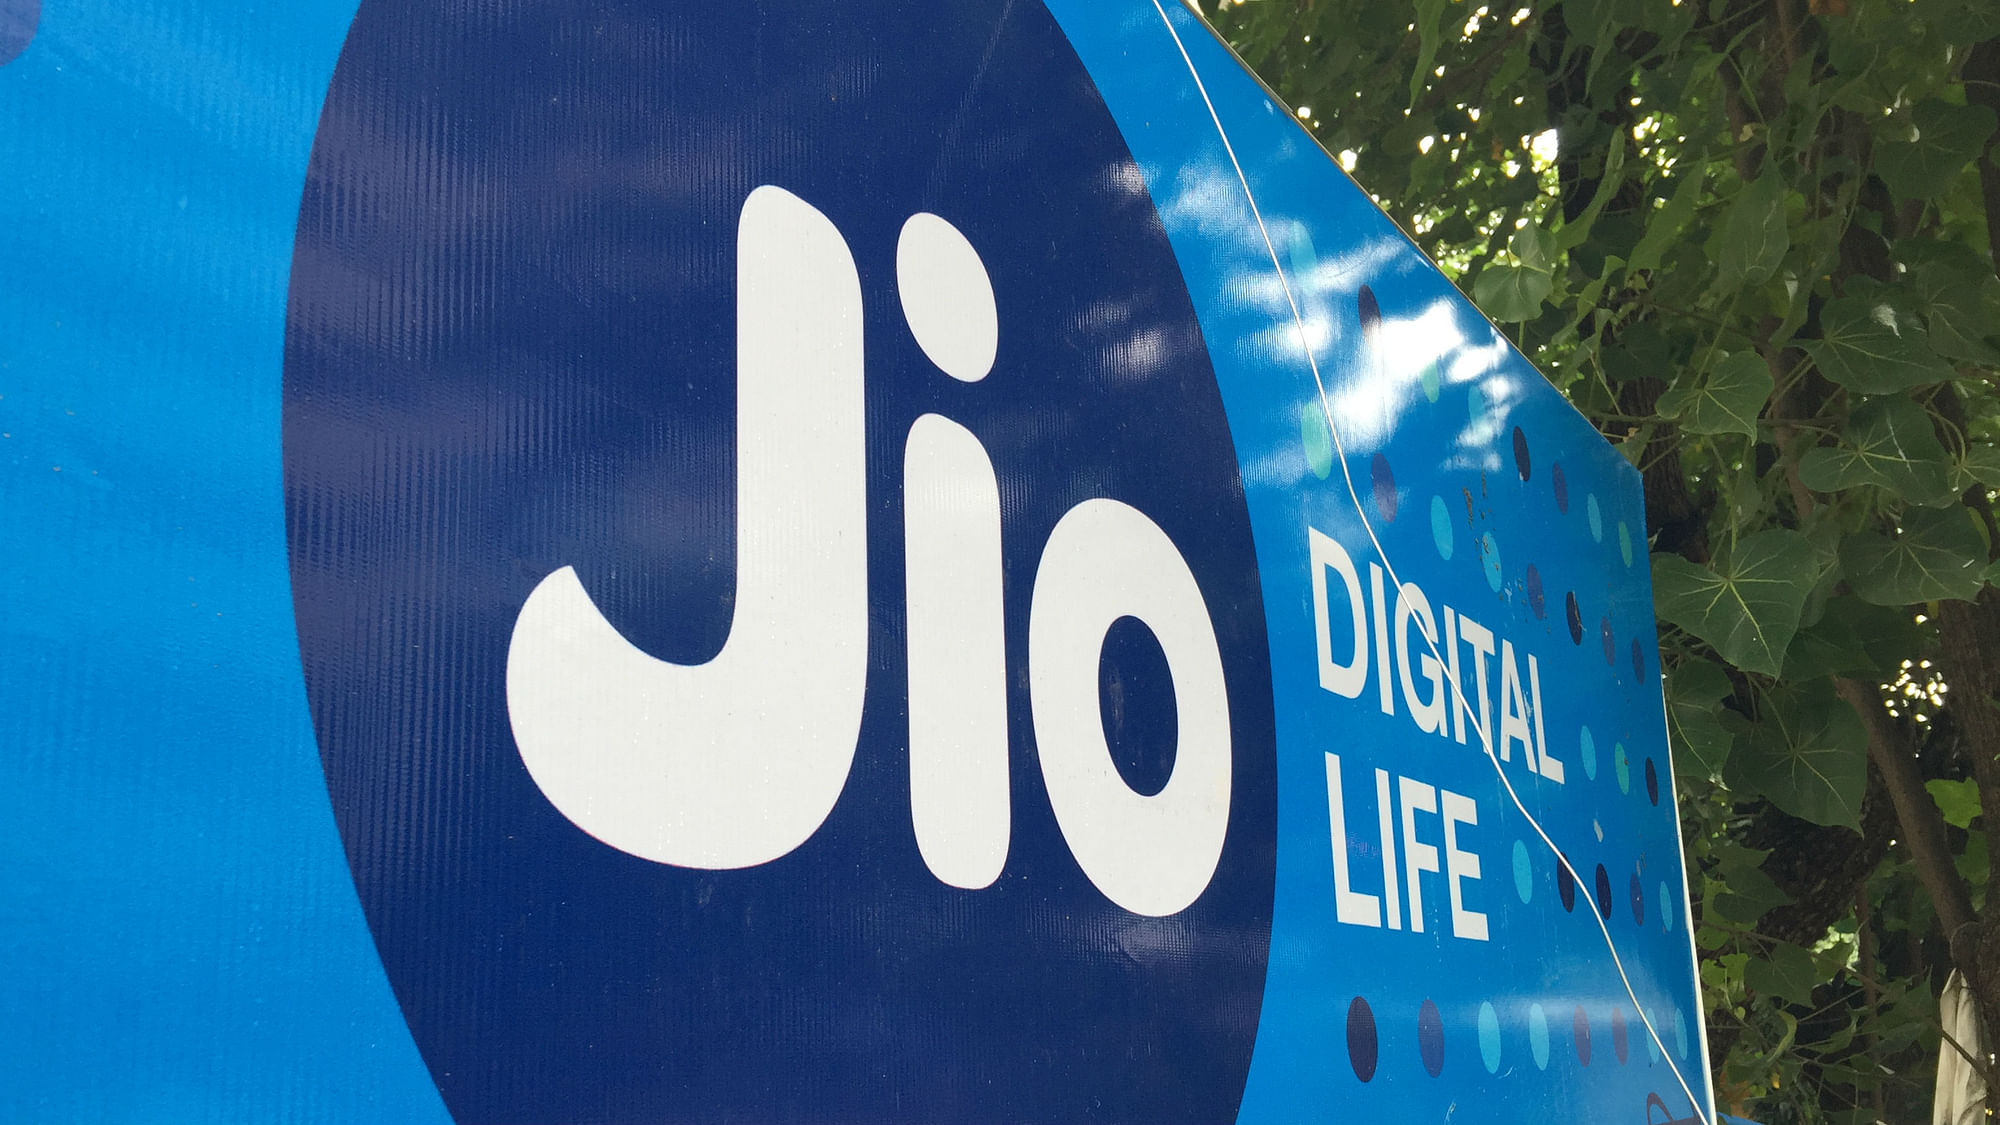 Reliance Jio caters to over 350 million users on its network in the country.